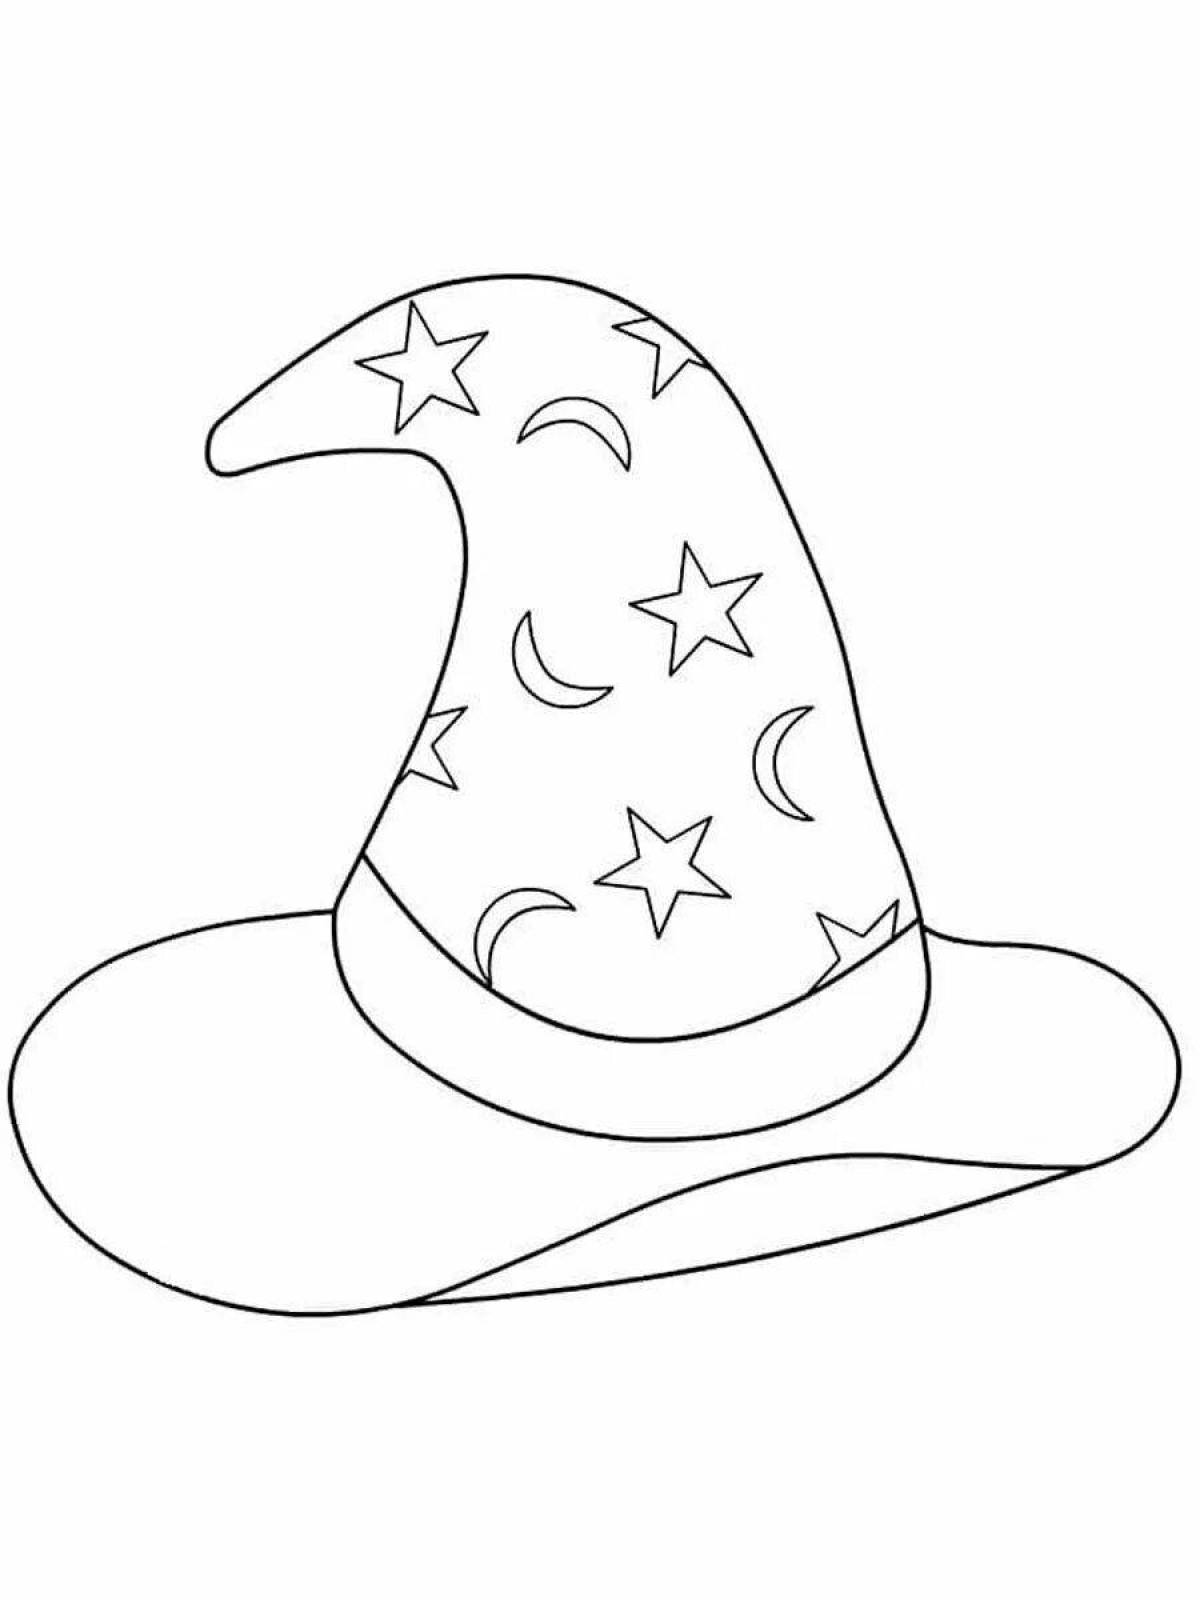 Coloring page deluxe wizard hat